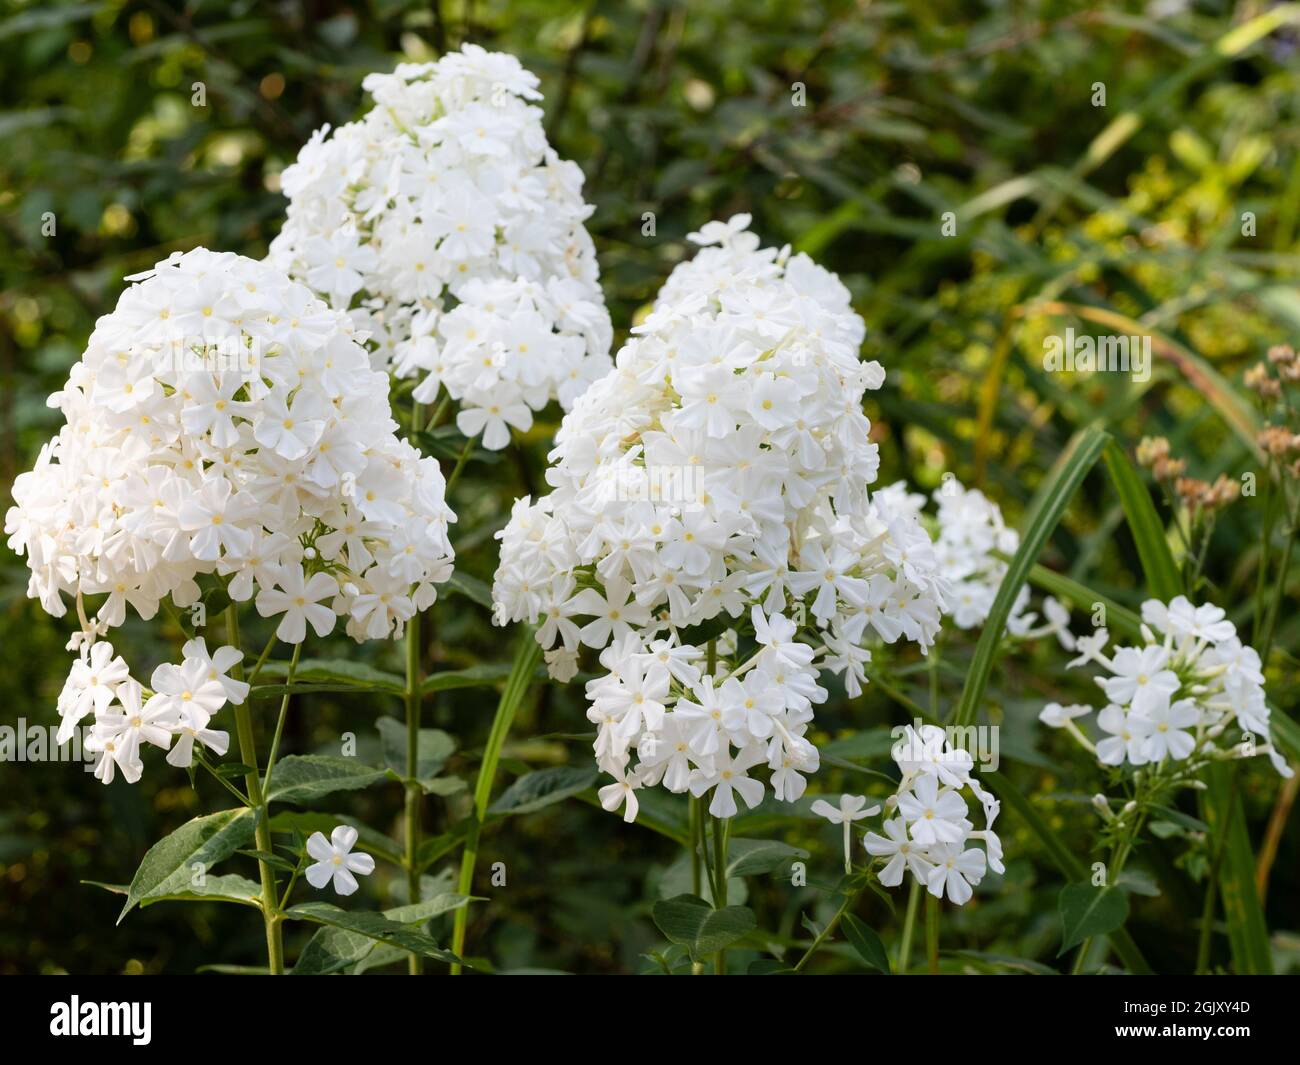 Late summer panicles of fragrant white flowers of the hardy perennial Phlox paniculata Mount 'Fuji' Stock Photo